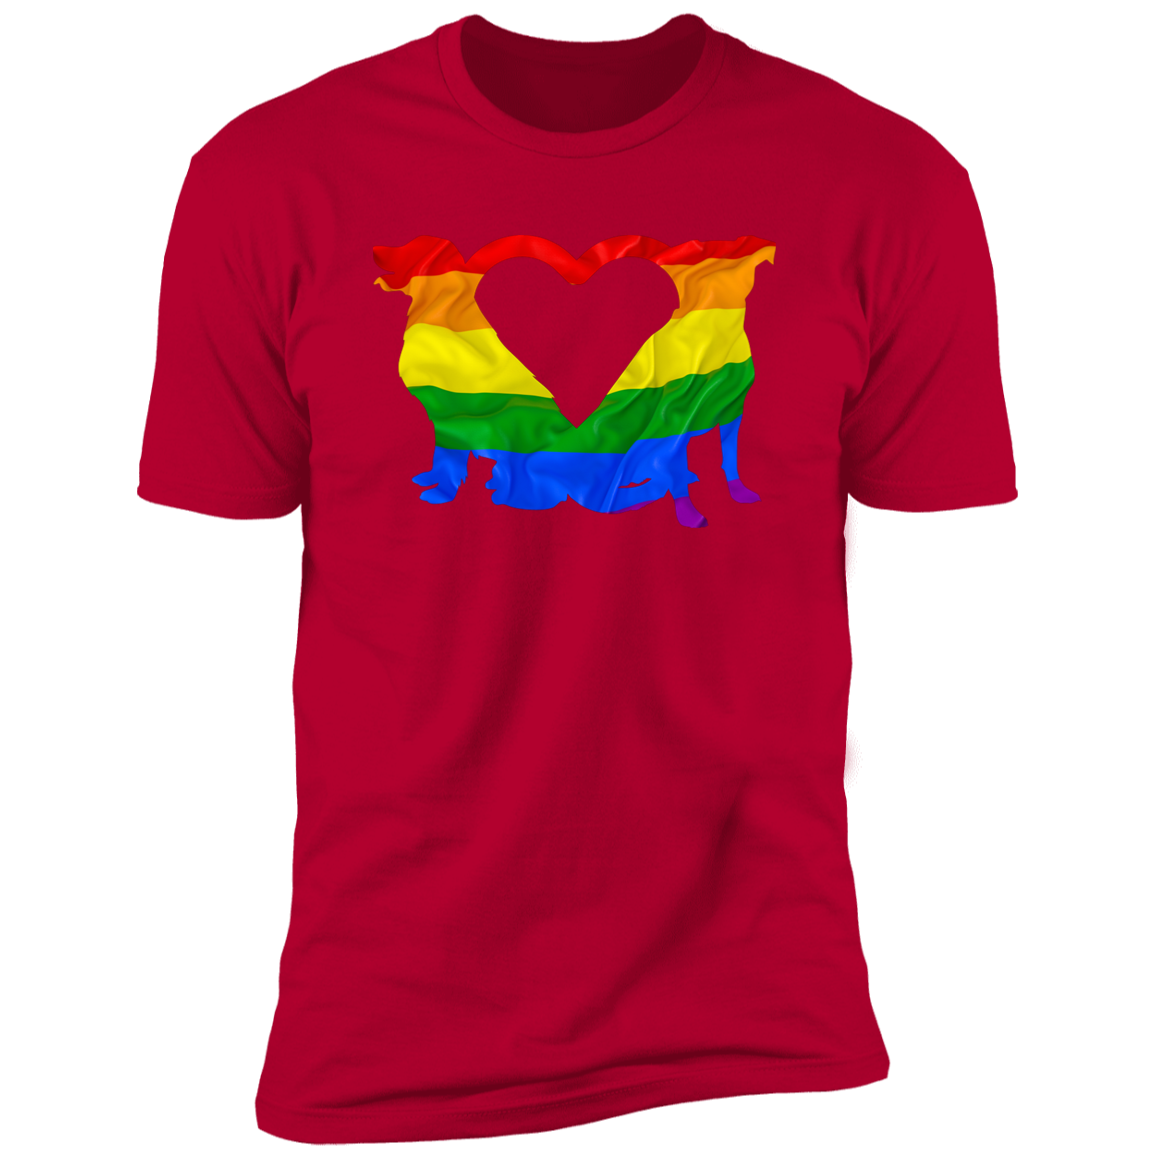 Dog Pride, Dog Pride shirt for humas, in red